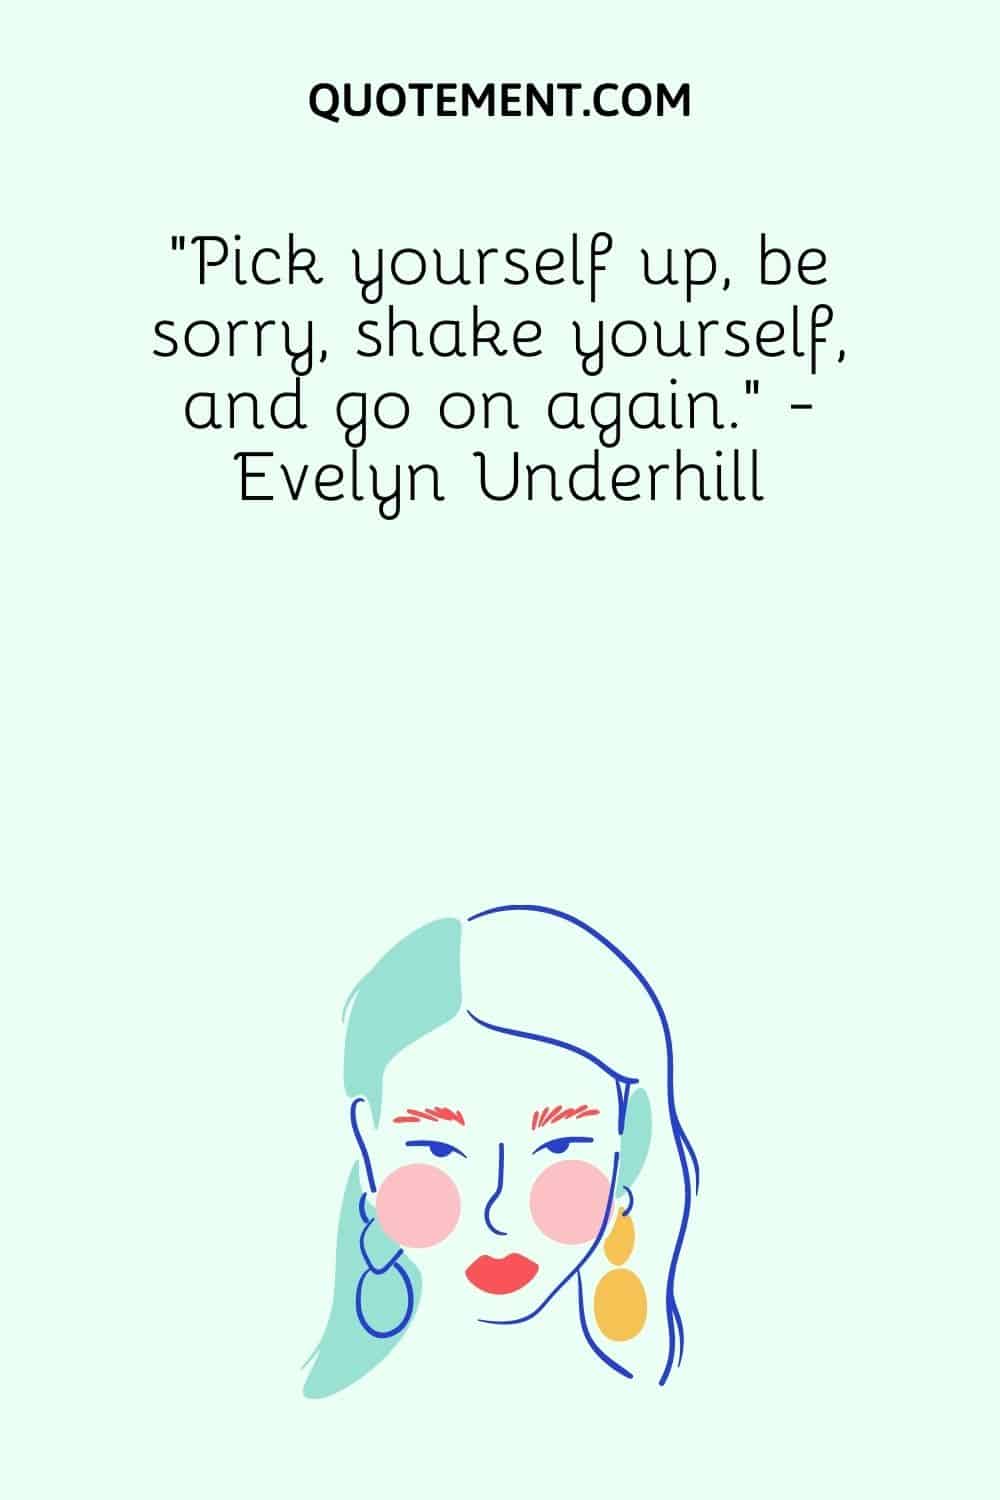 Pick yourself up, be sorry, shake yourself, and go on again.” - Evelyn Underhill